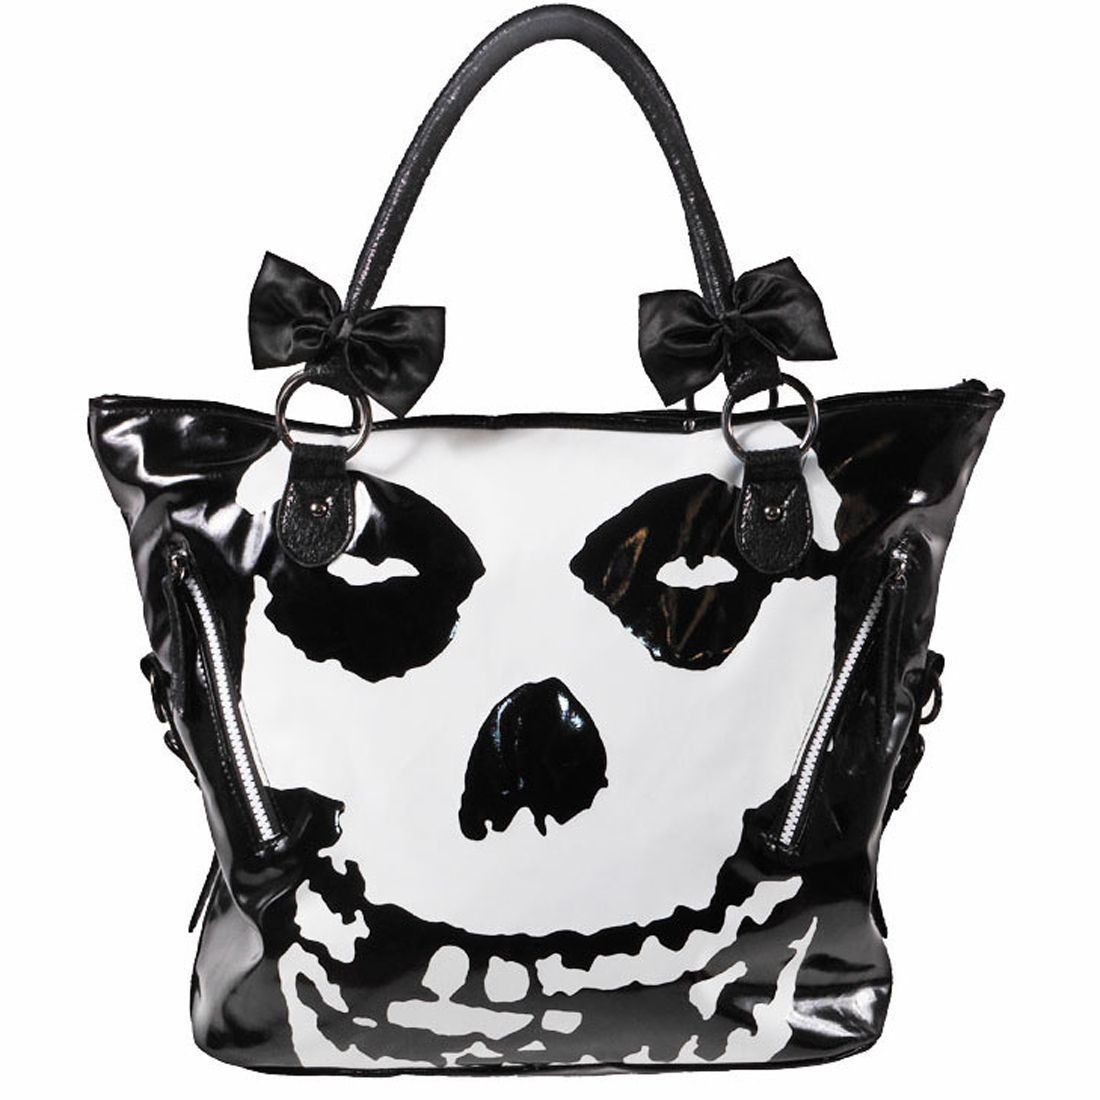 Misfits Limited Release Handbag by Iron Fist.